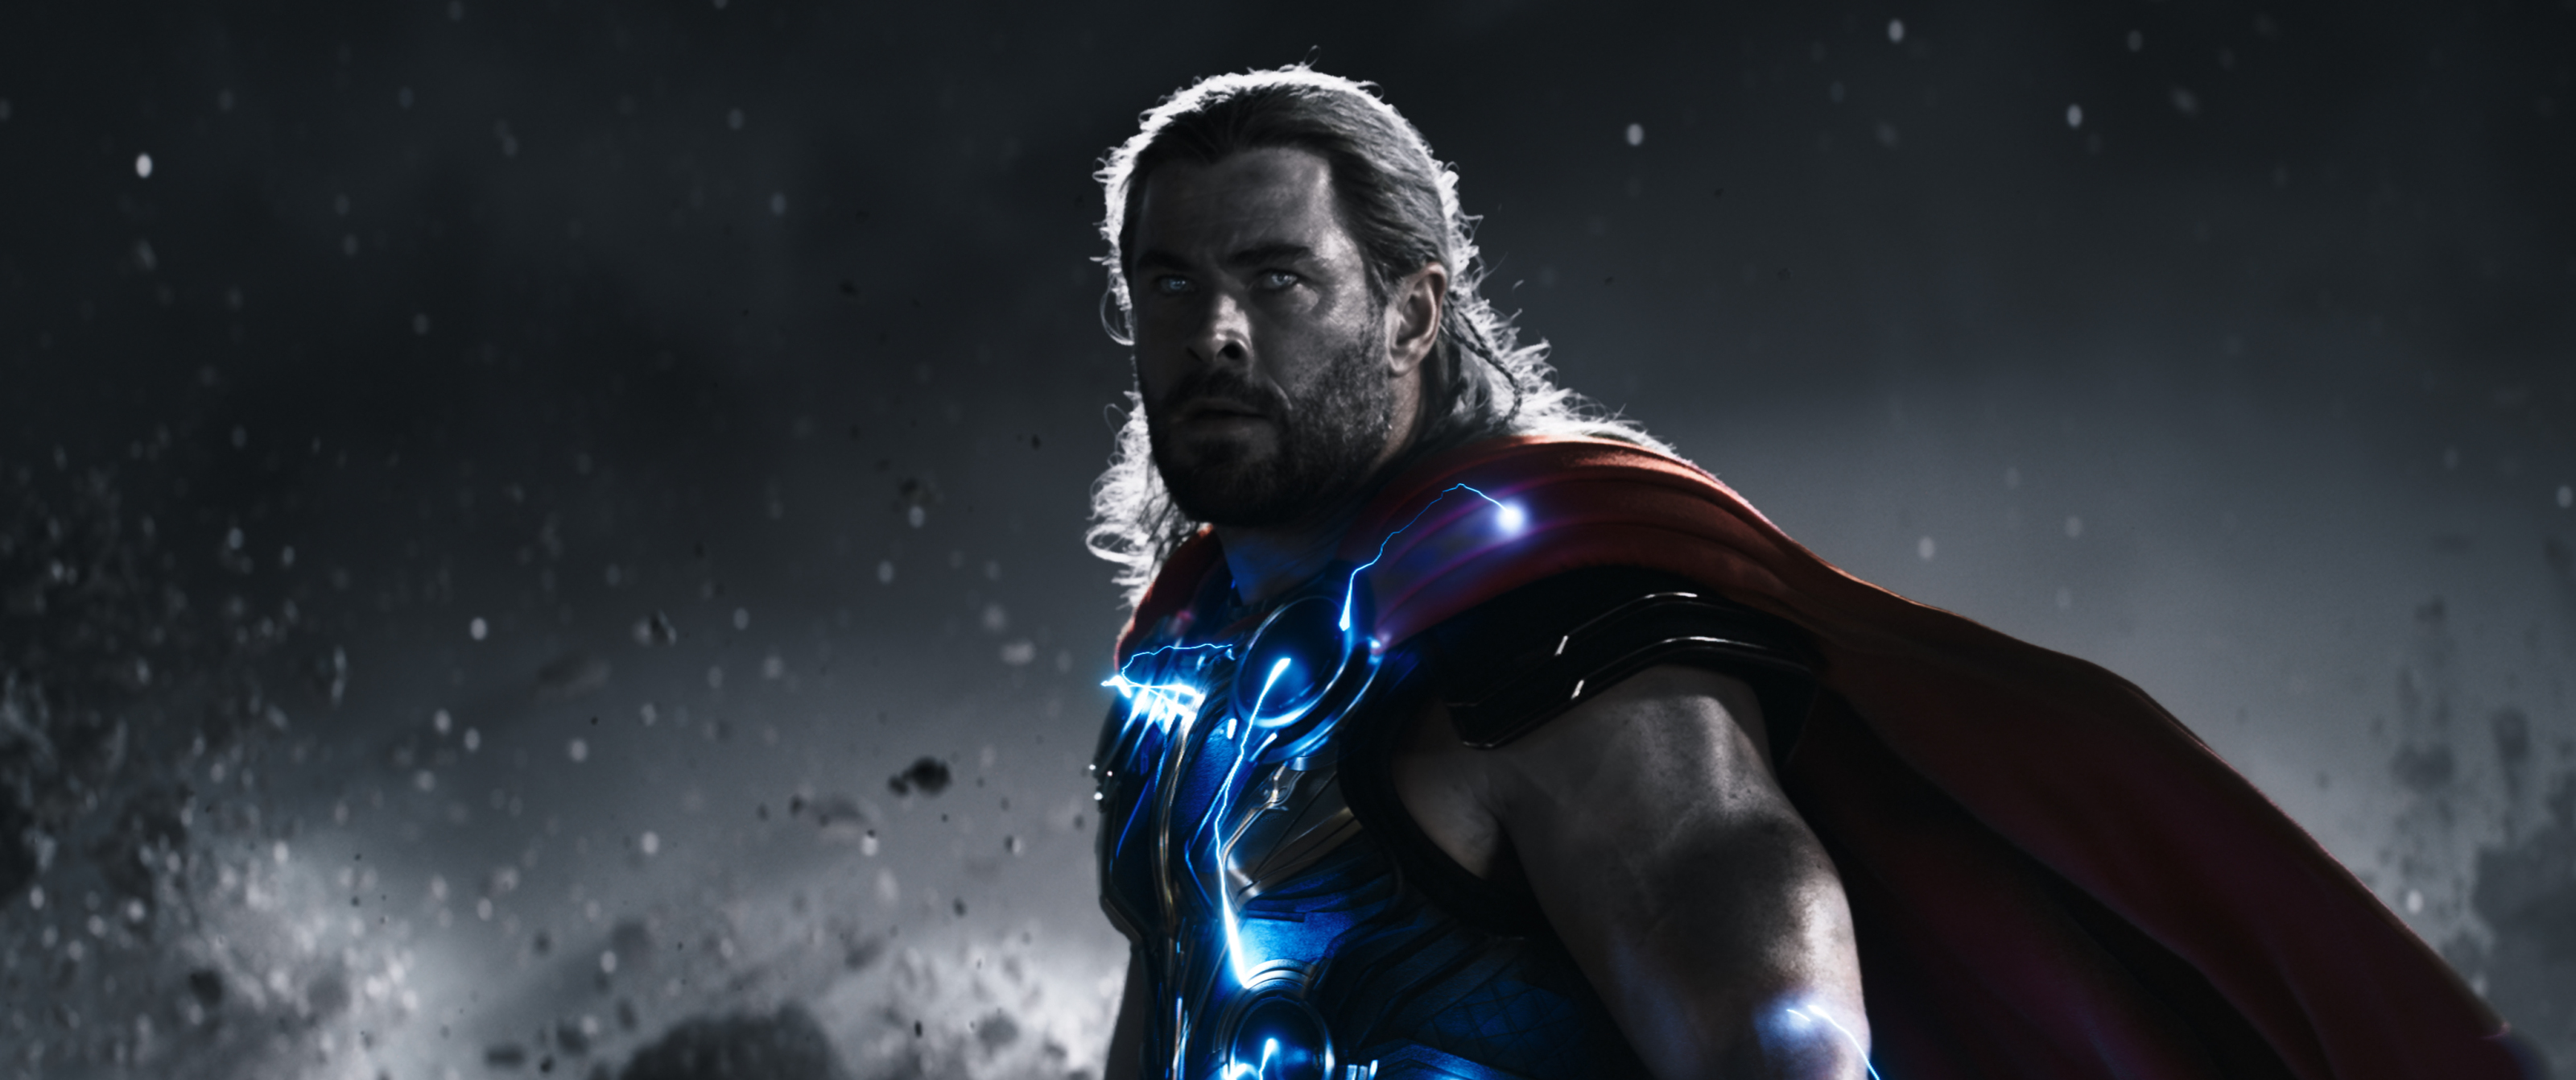 Why Is The CGI Floating Head In Thor So Bad? 